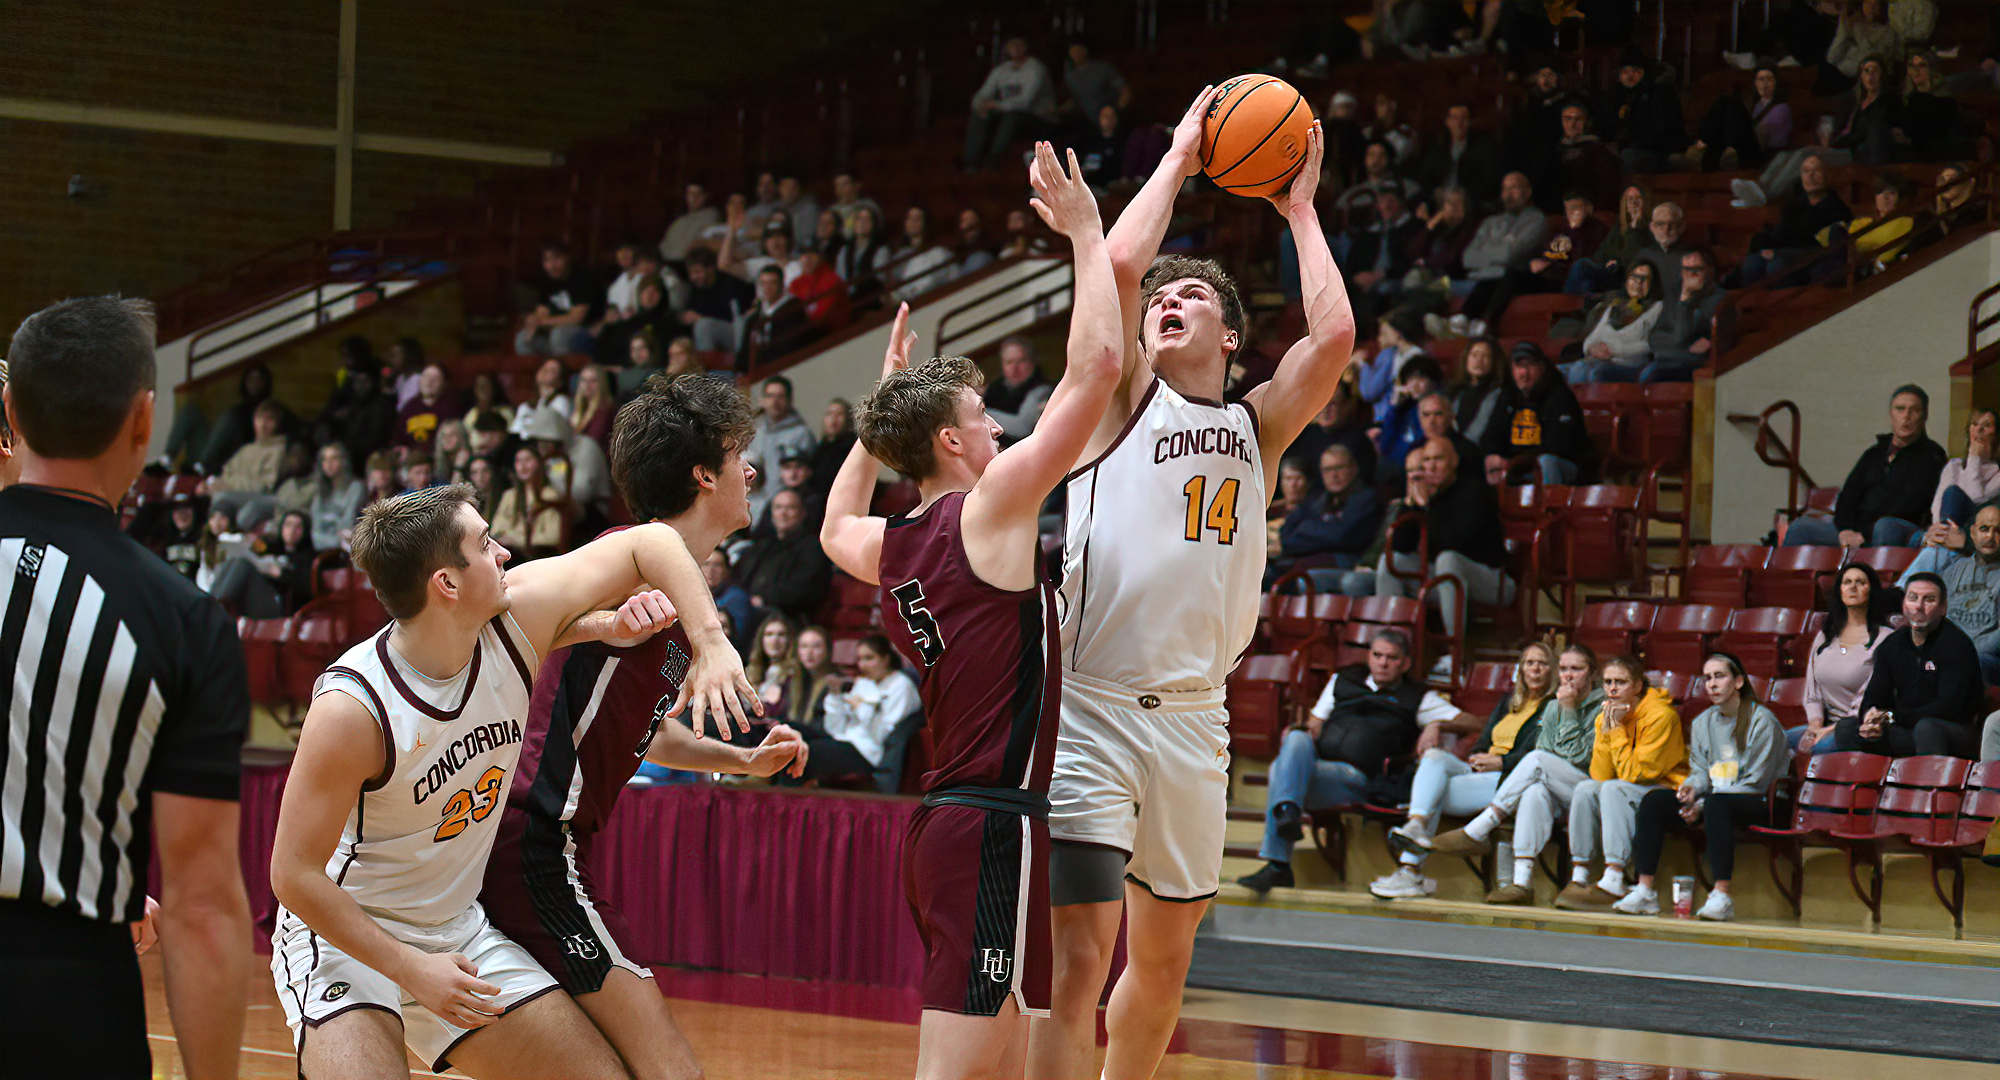 Rowan Nelson scored a team-high 20 points and had four rebounds in the Cobbers' win at Hamline. It's his second 20-point games of the season.